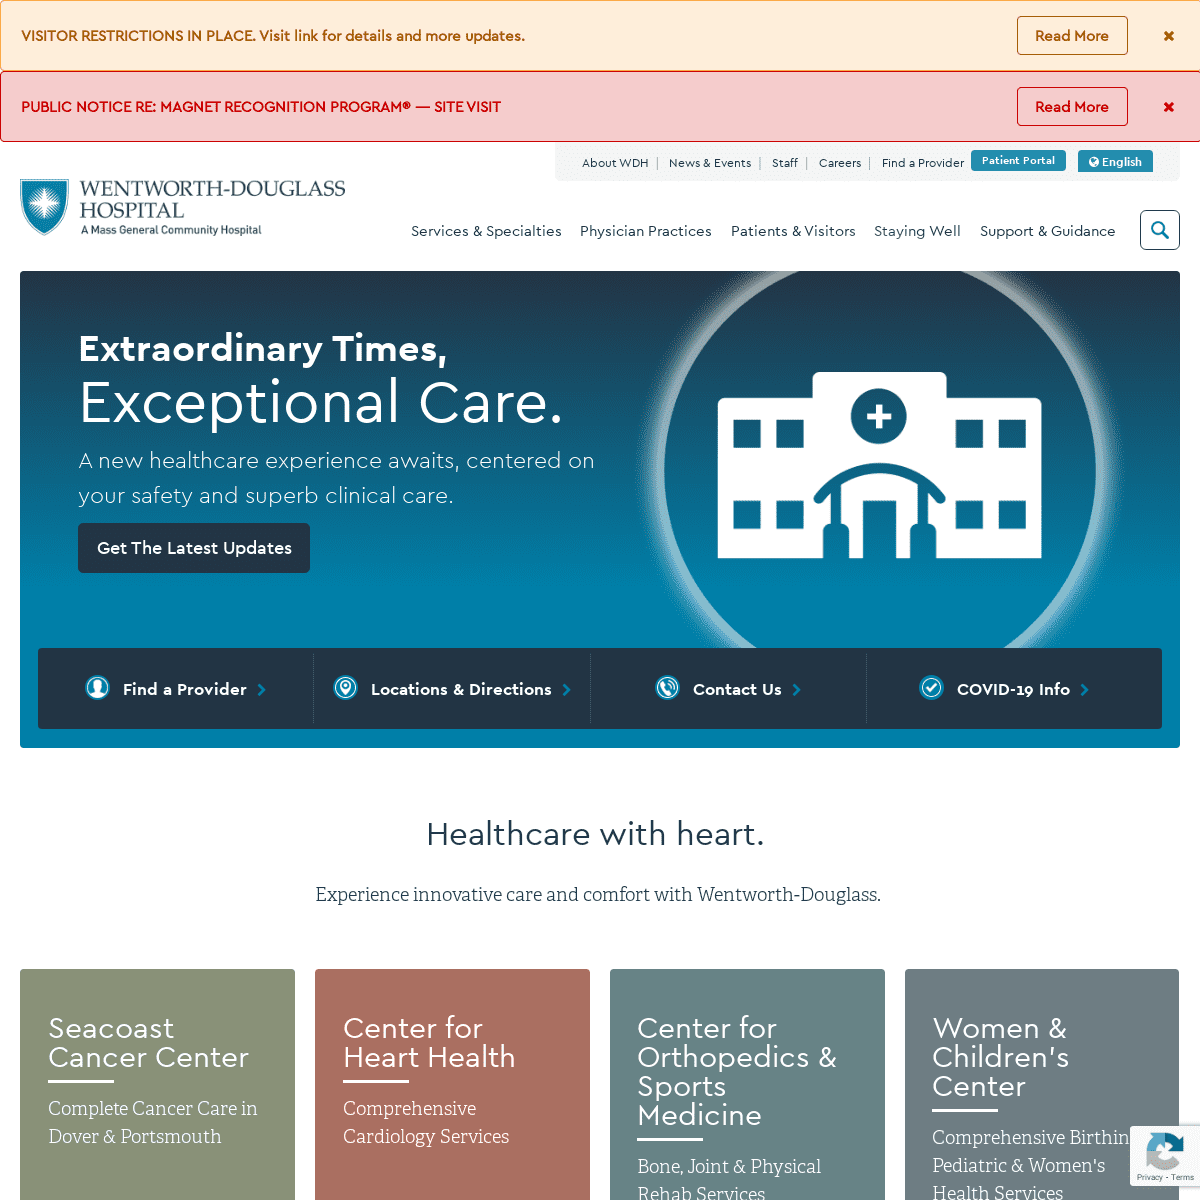 A complete backup of https://wdhospital.org